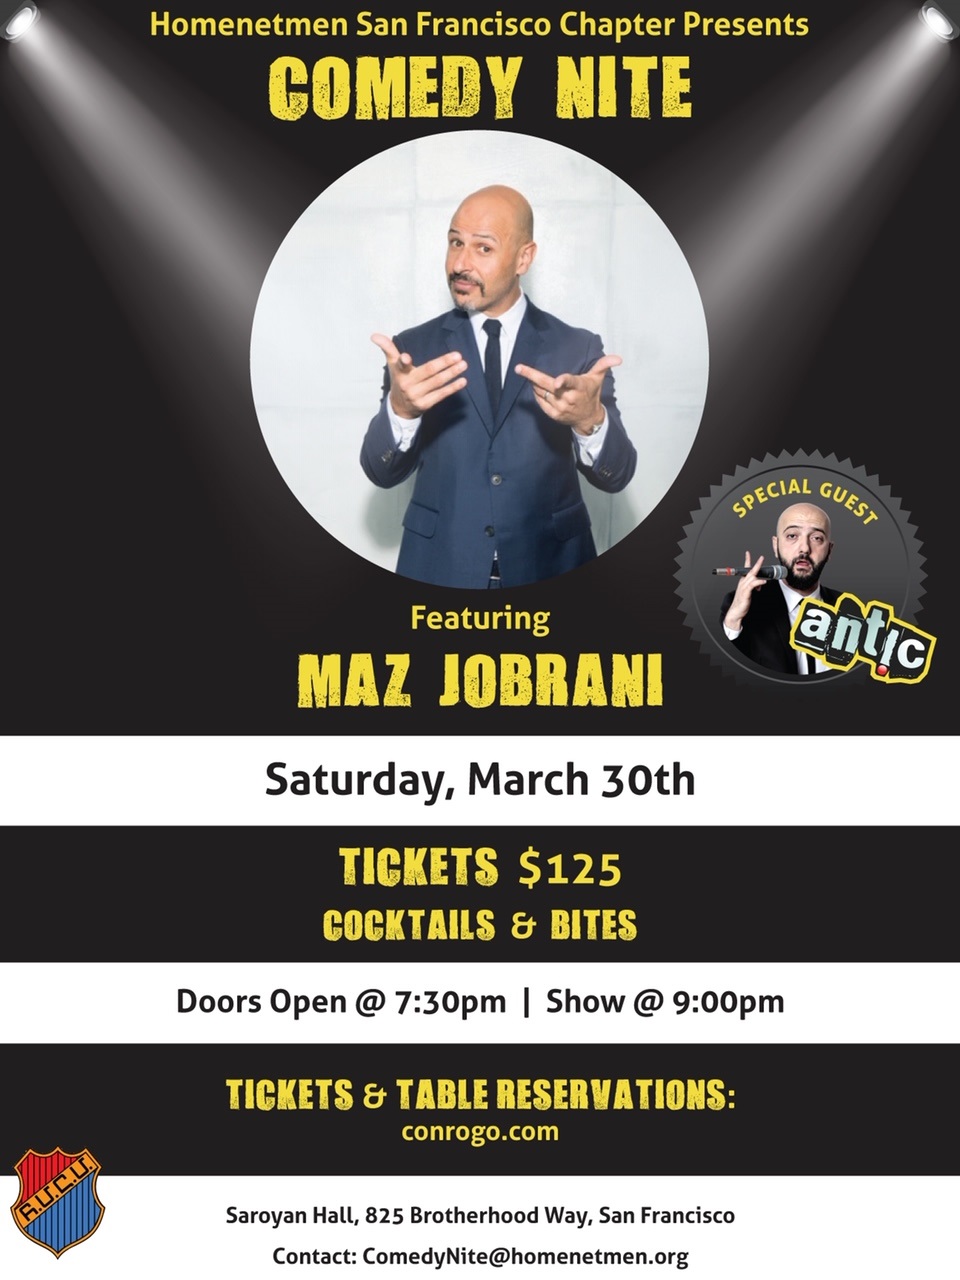 Maz Jobrani Comedy Nite with Special Guest Antic!